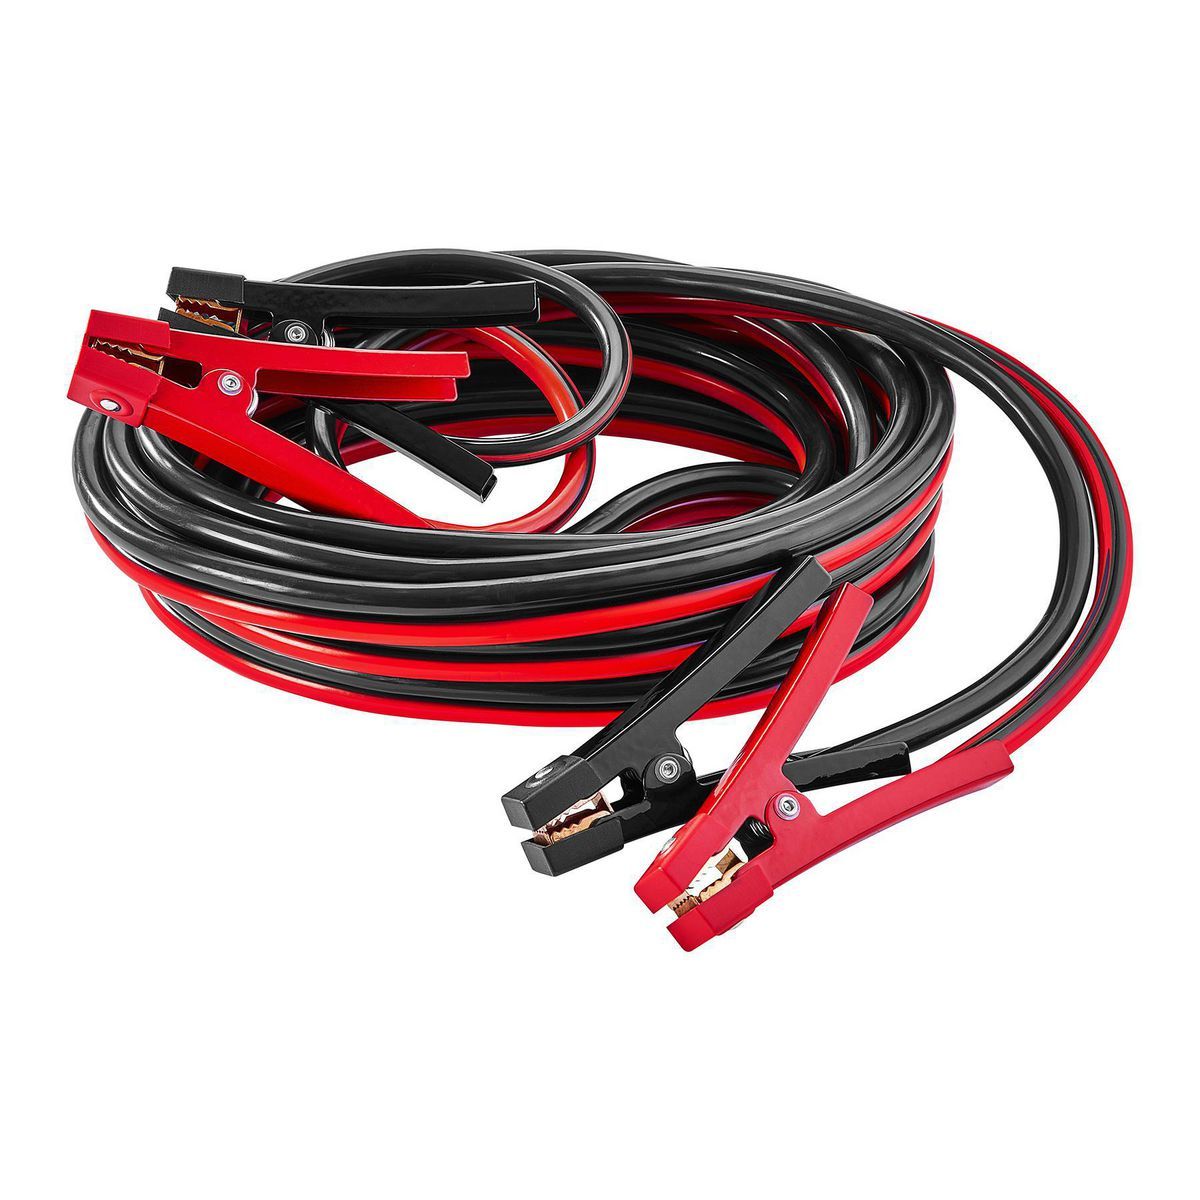 30 ft. 1 Gauge Jumper Cables with Quick Connect